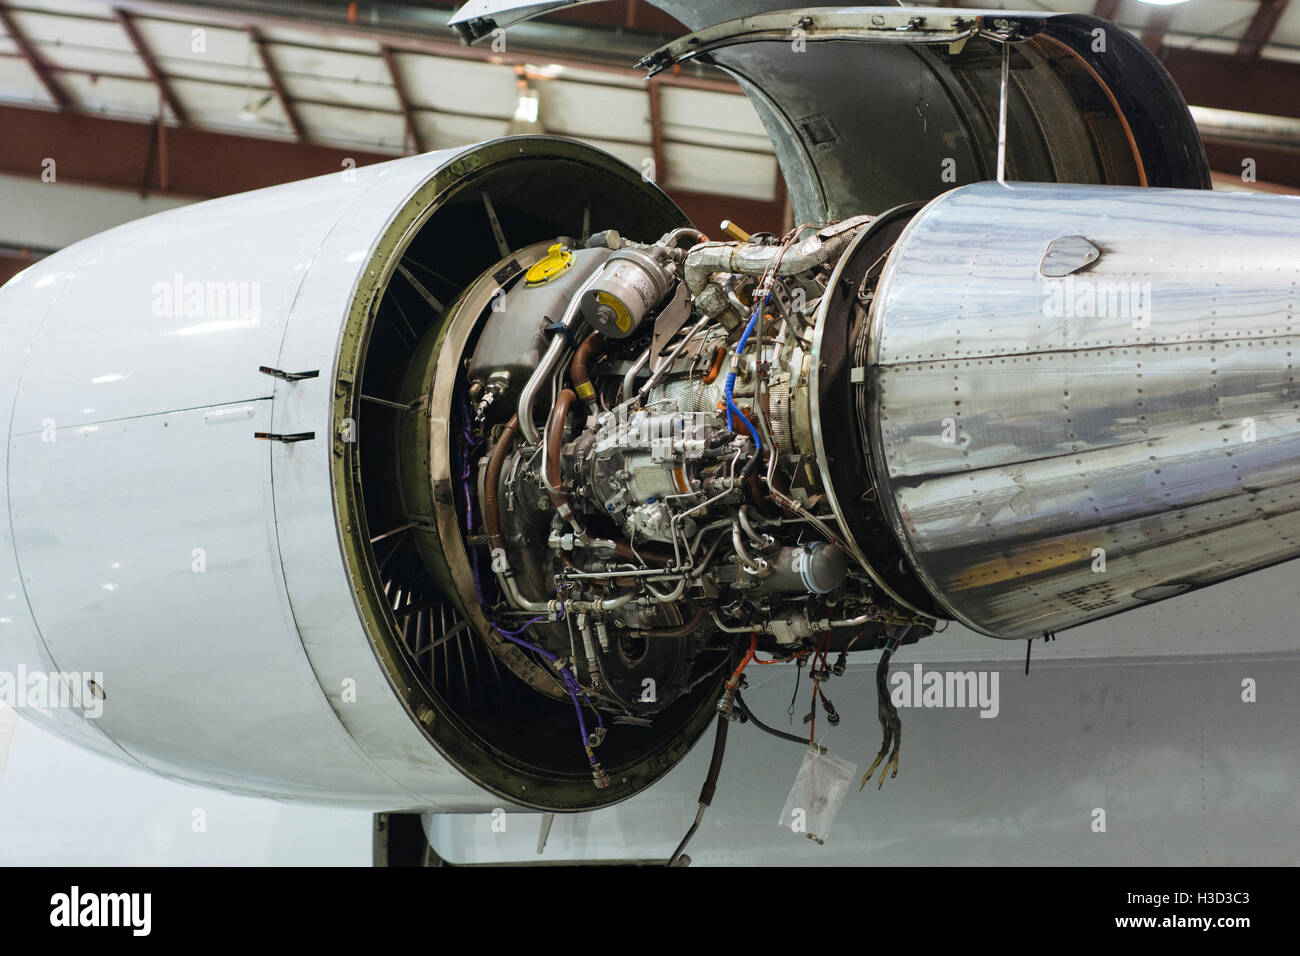 Low angle view of jet engine at airplane hanger Stock Photo